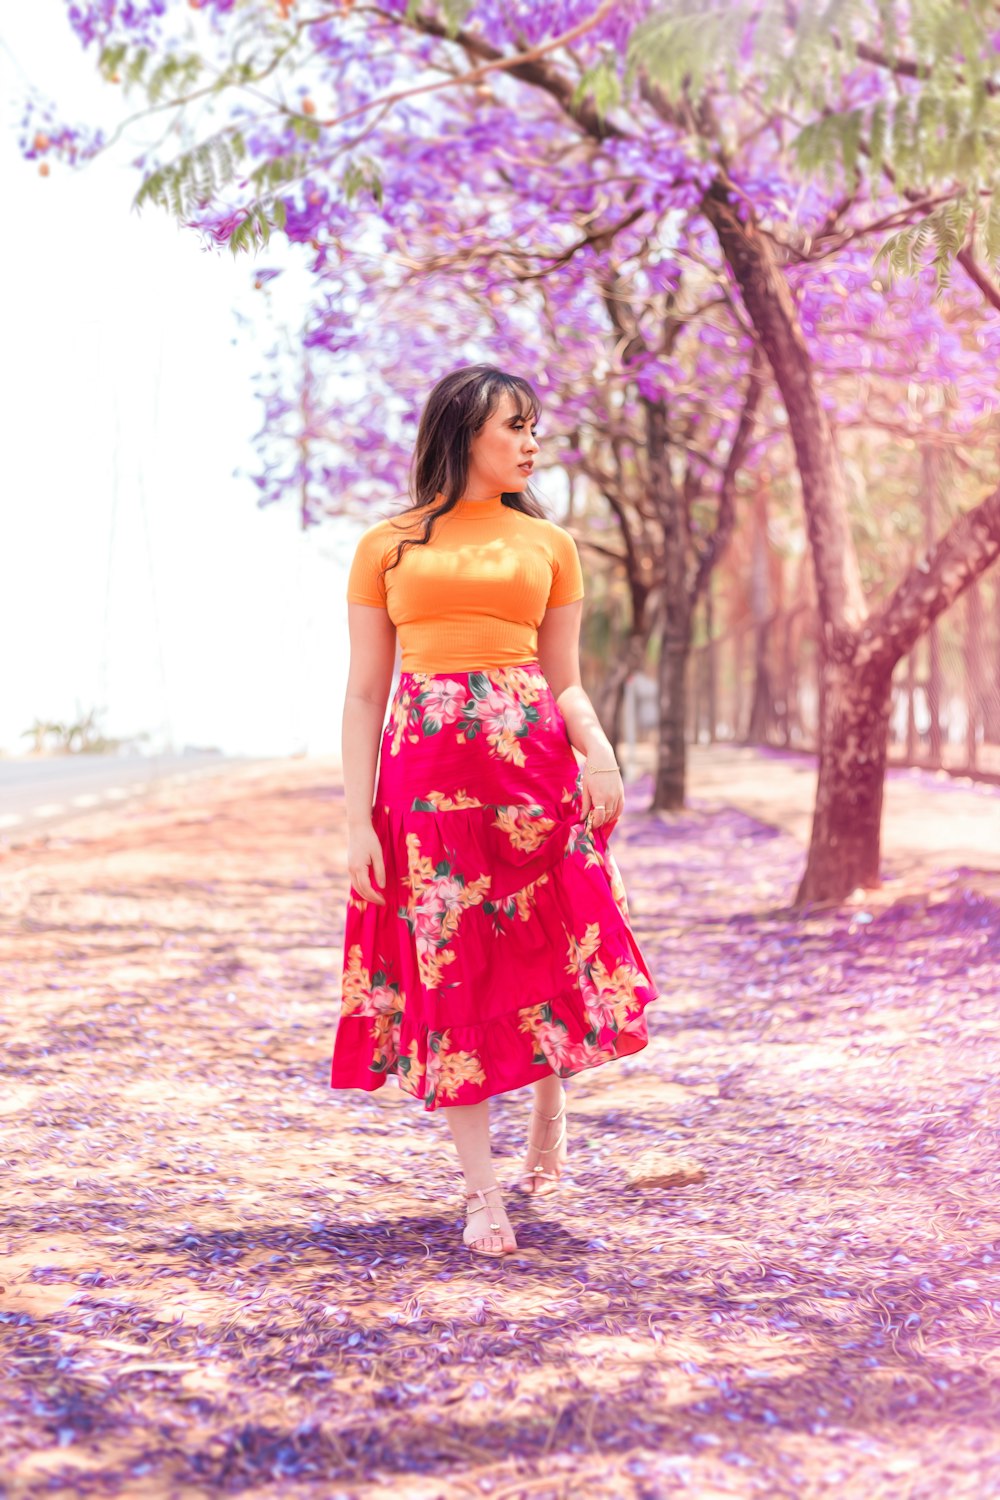 woman in red and white floral spaghetti strap dress standing on purple leaves during daytime